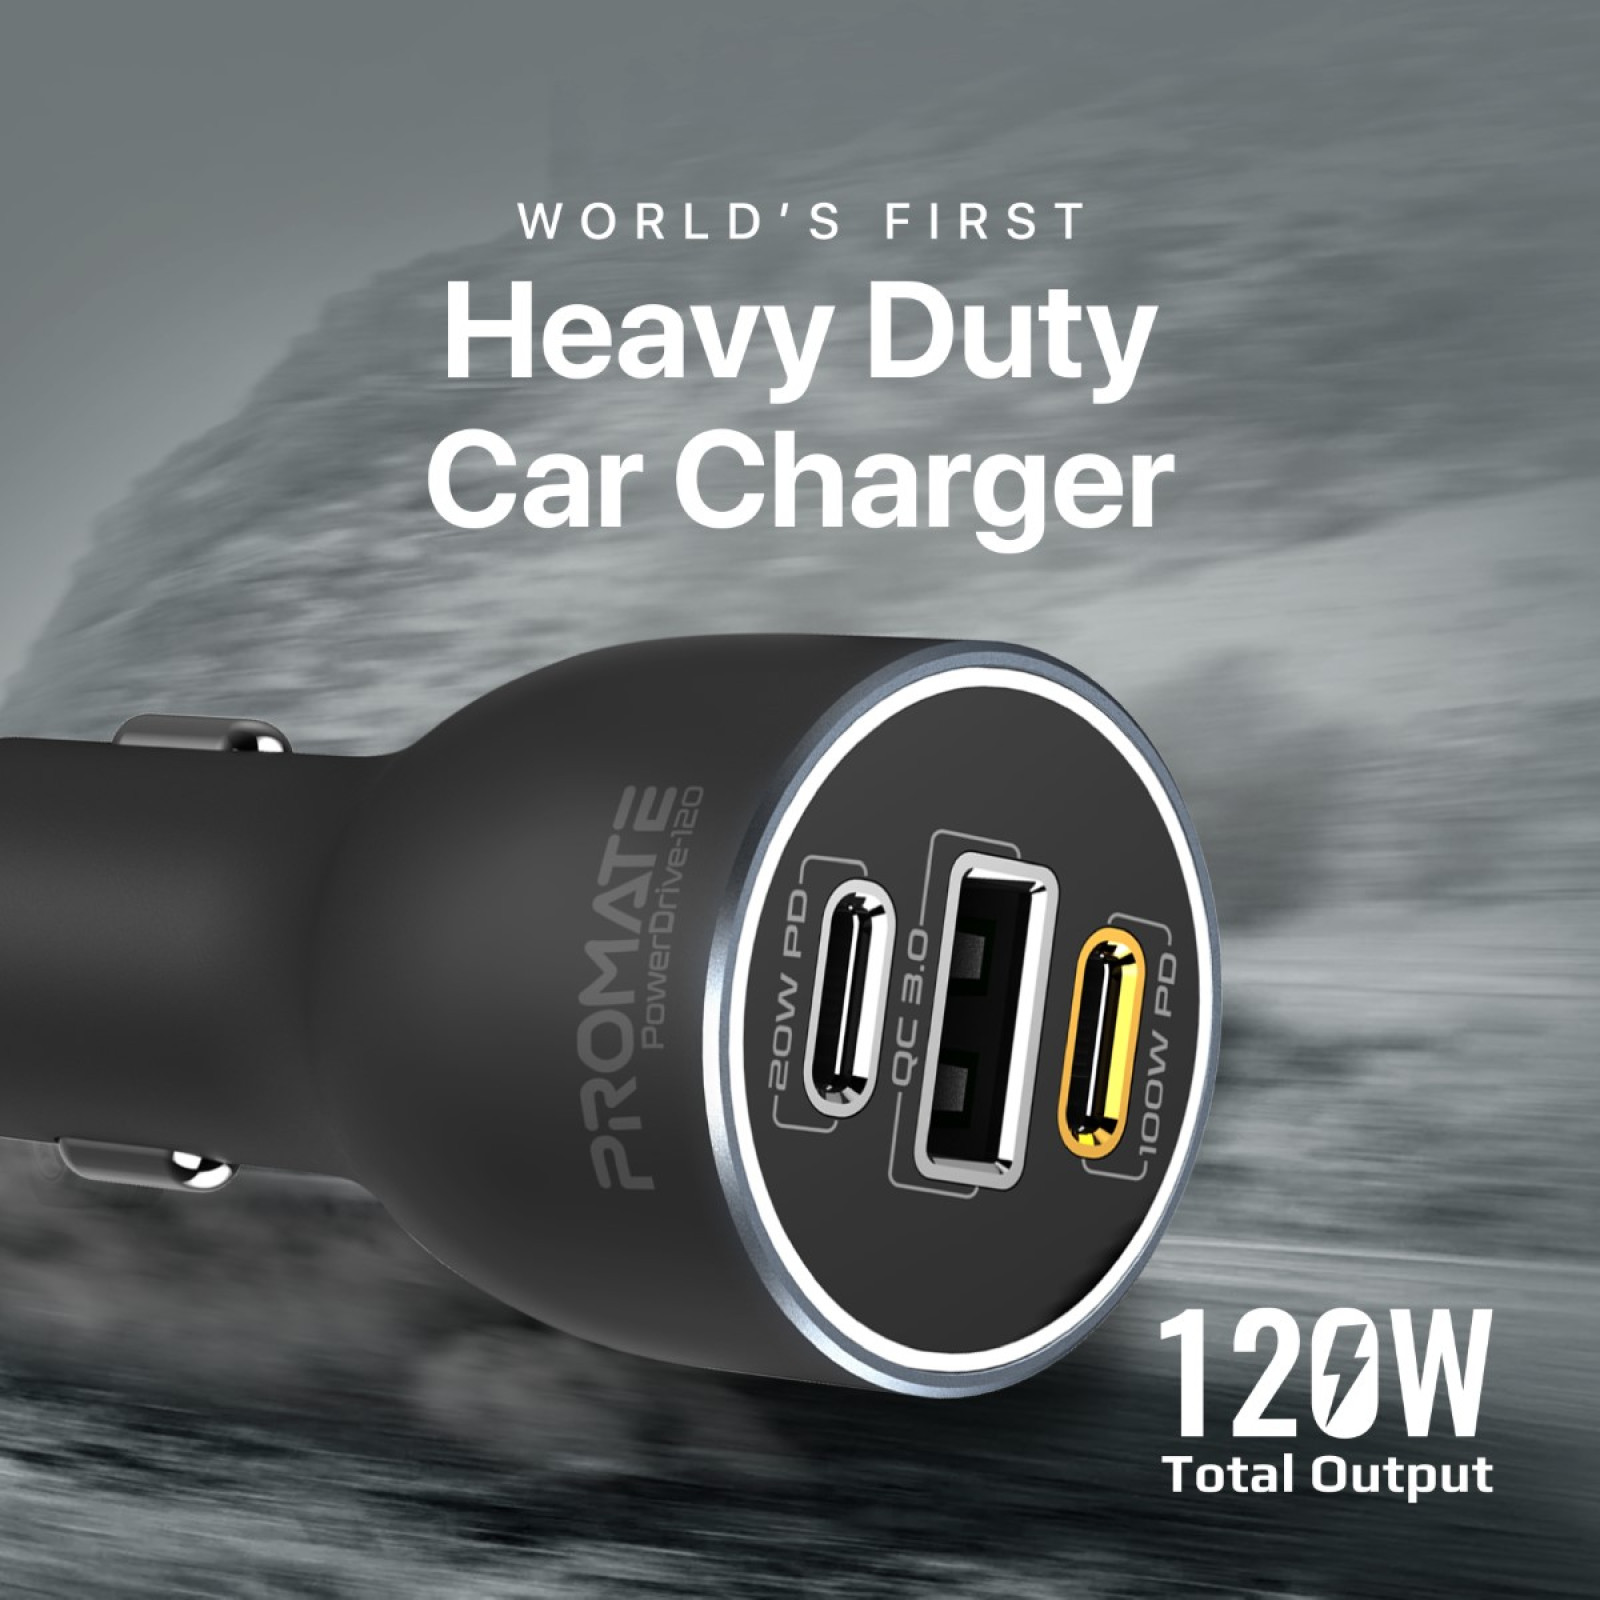   Car charger ProMate PowerDrive-120 120W black